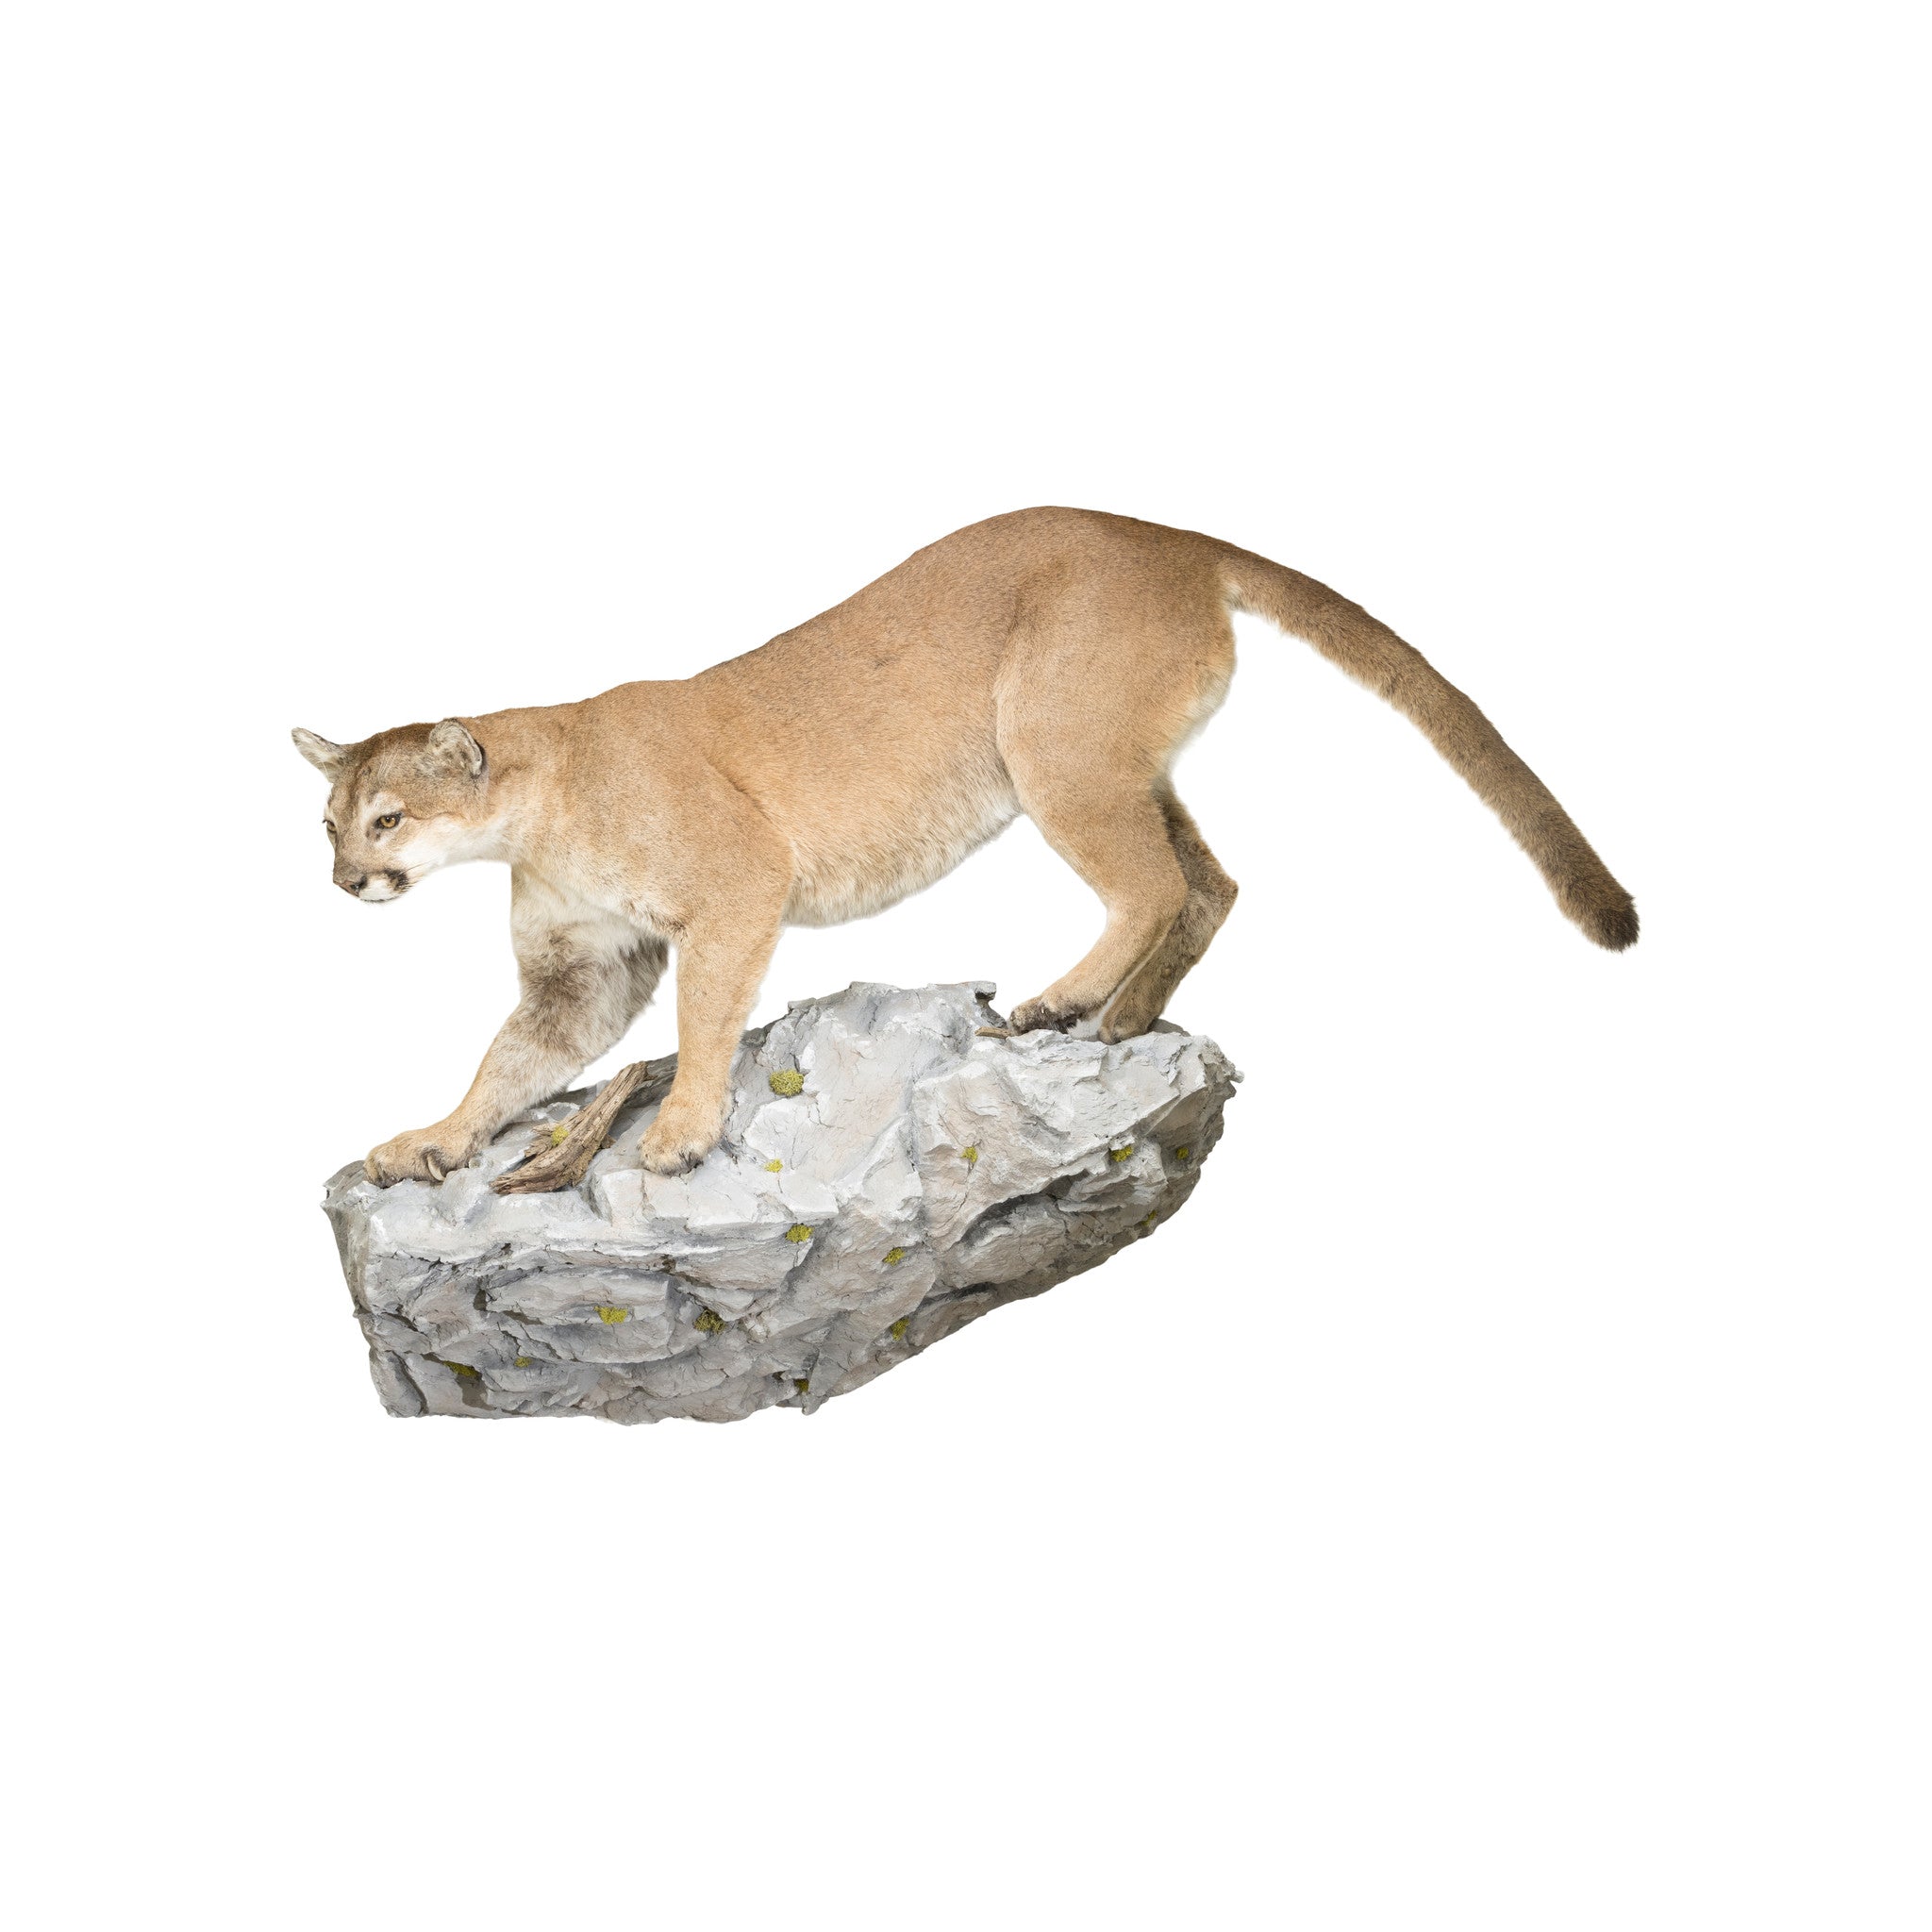 Huge Cougar Mount, Furnishings, Taxidermy, Cougar